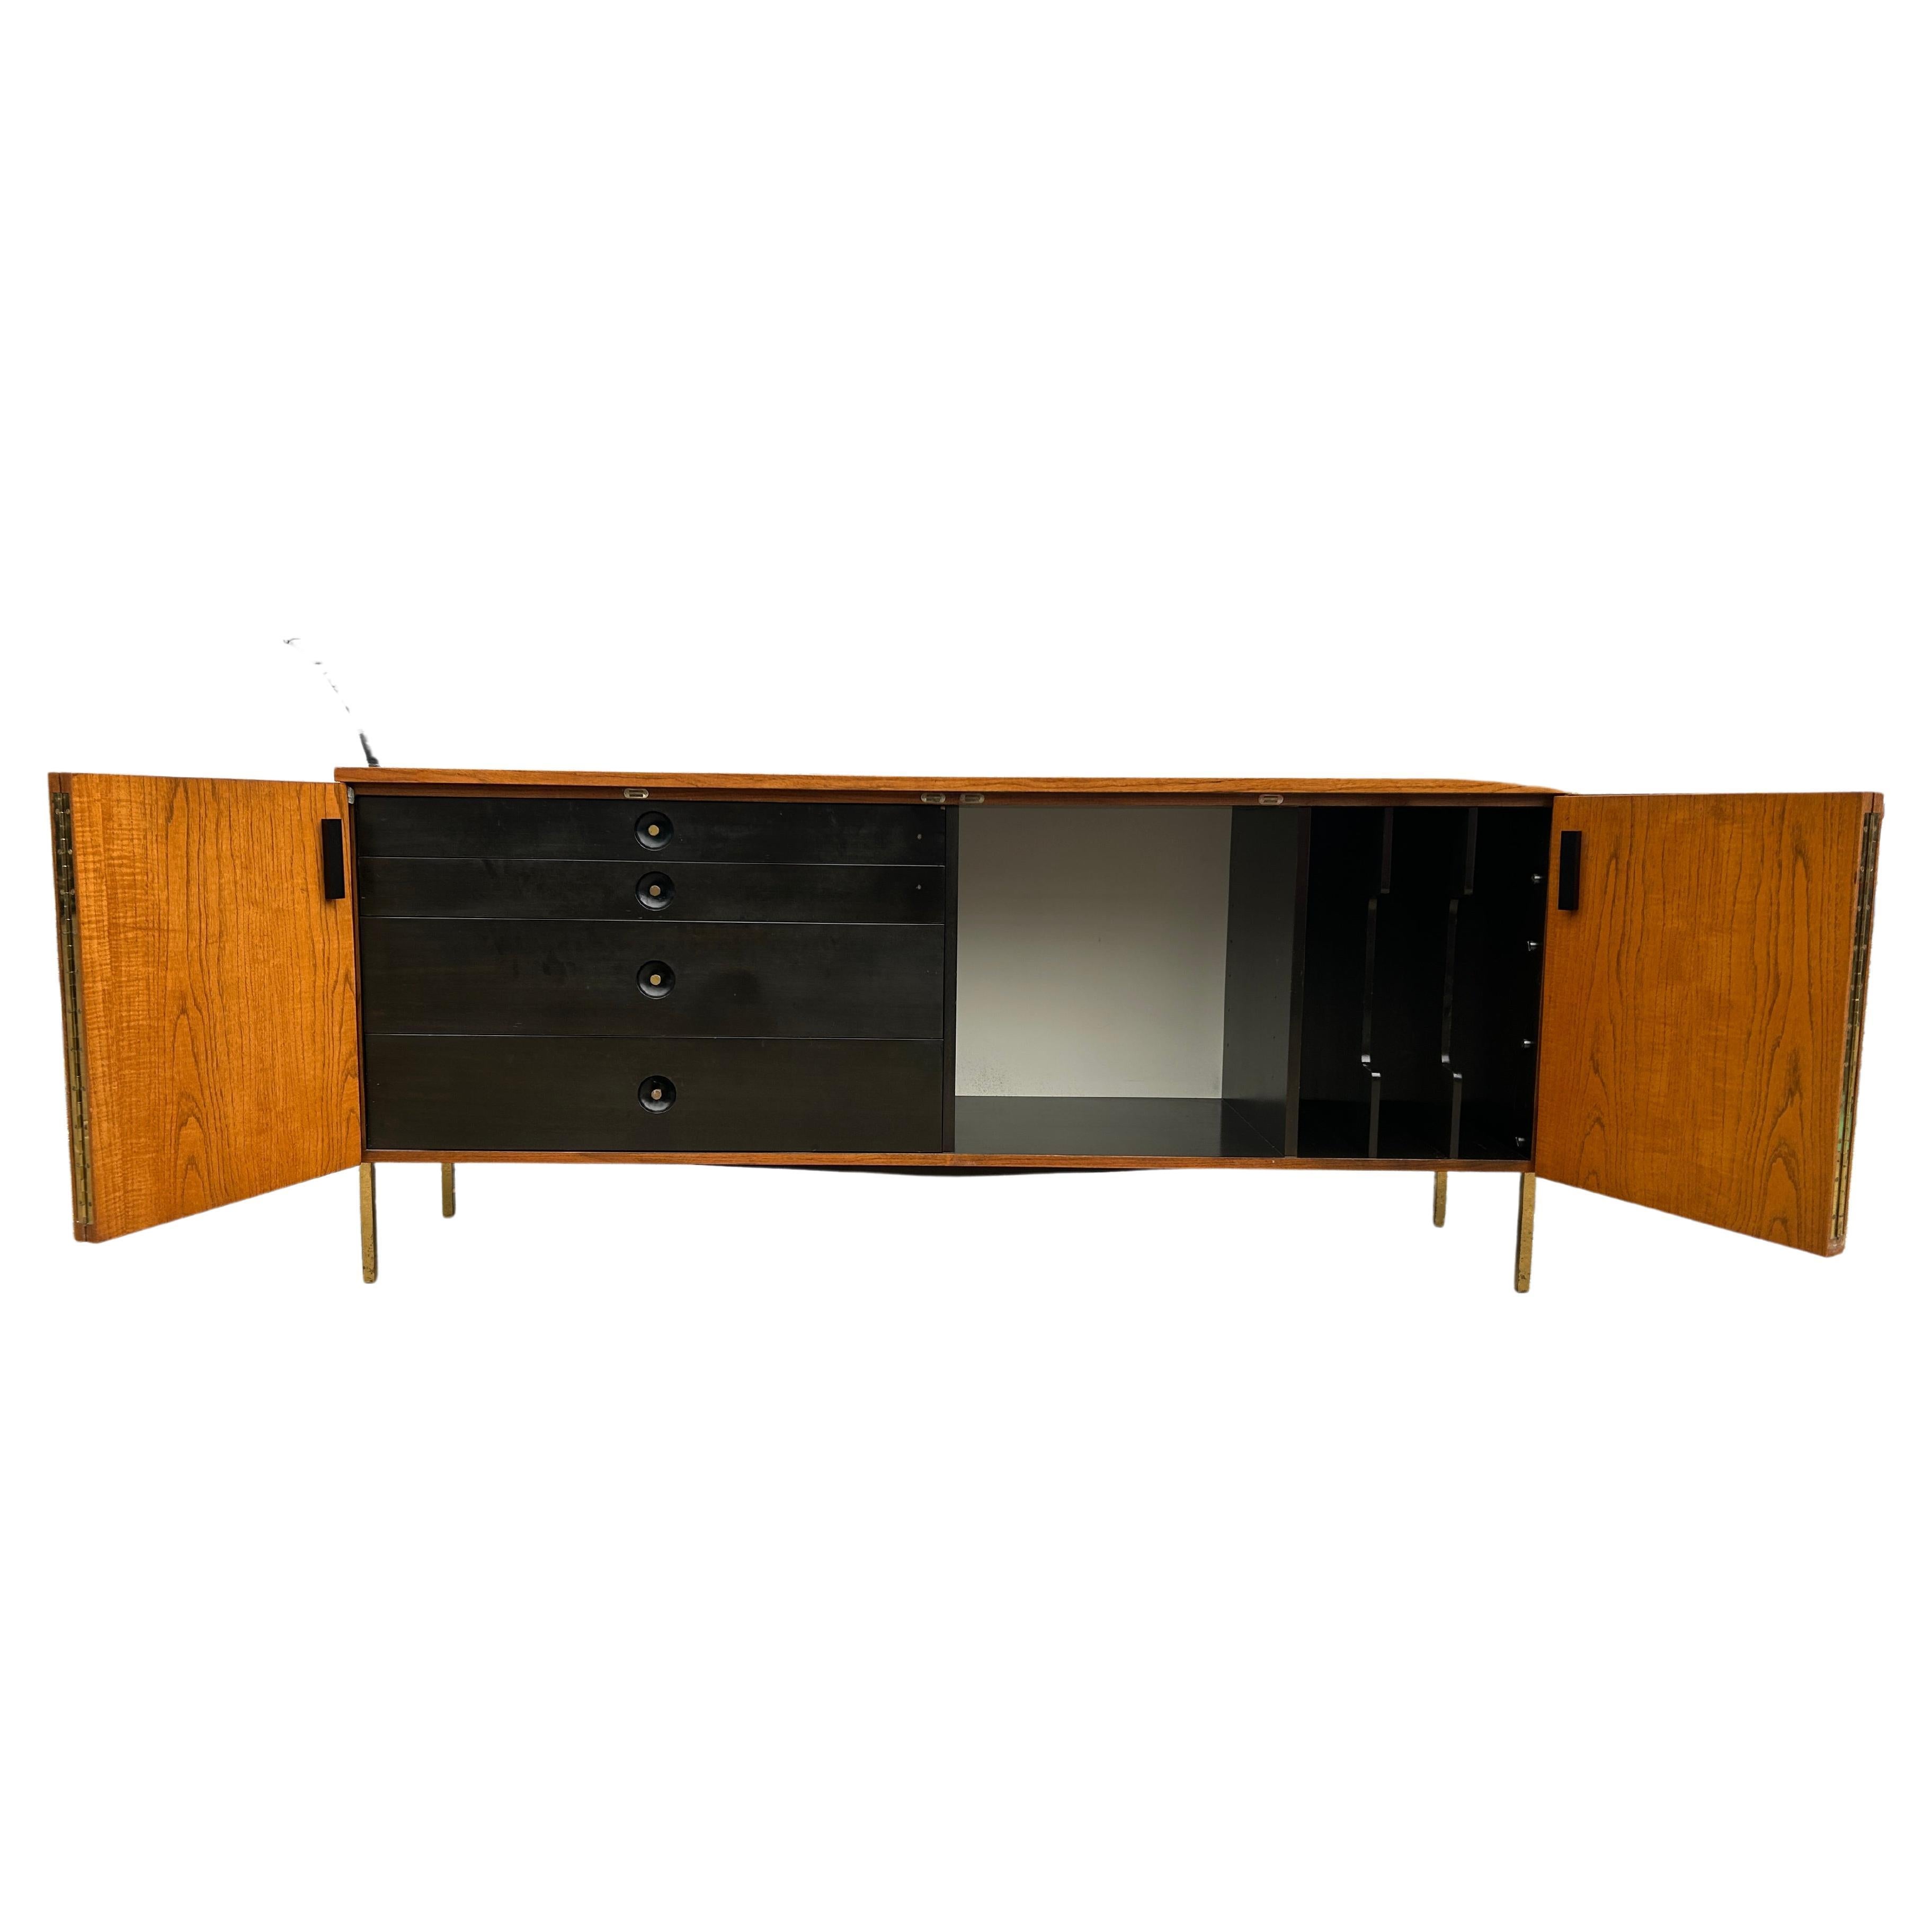 Incredibly crafted Harvey Probber Stunning Midcentury credenza, sideboard or audio cabinet. Retains the metal tag inside top drawer. Beautiful bleached walnut wood with 4 ebonized interior drawers, 1 adjustable shelf and vertical slots. Top drawer